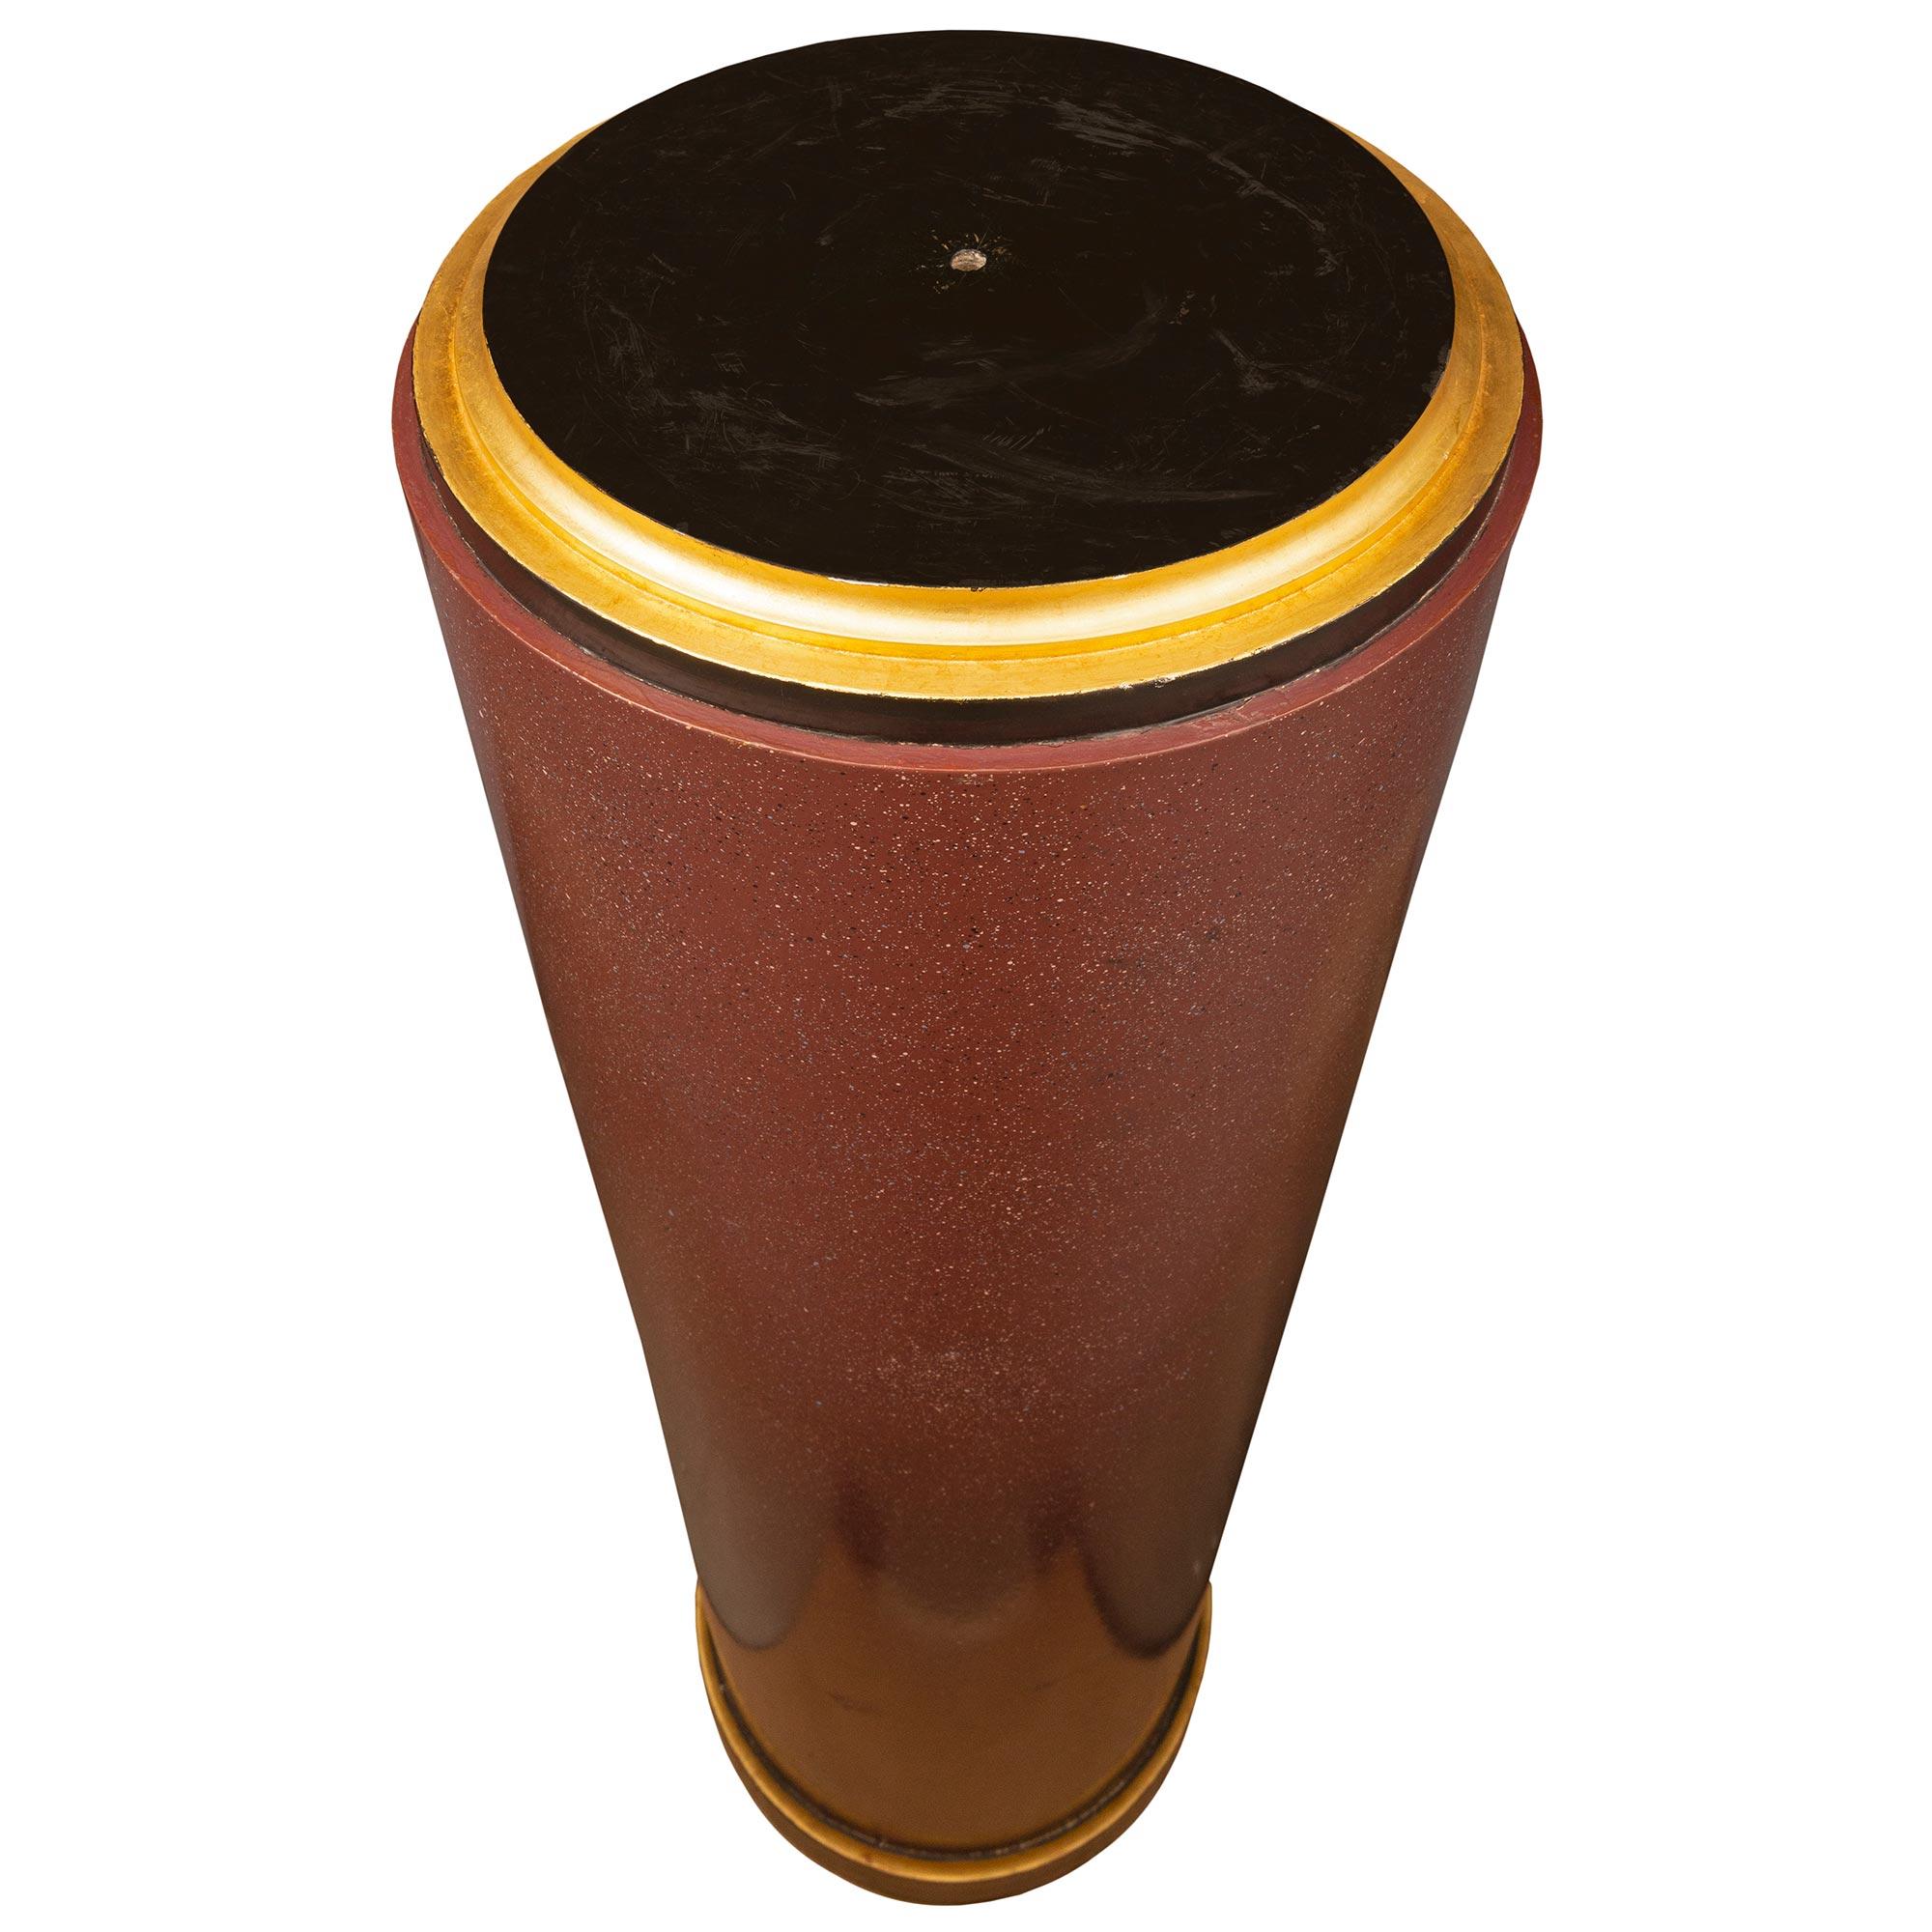 An impressive and large scale pair of 19th century faux painted porphyry, ebony and giltwood pedestal columns. Each pedestal is raised by a fine circular ebony base with a most elegant wrap around giltwood band. The circular central supports display